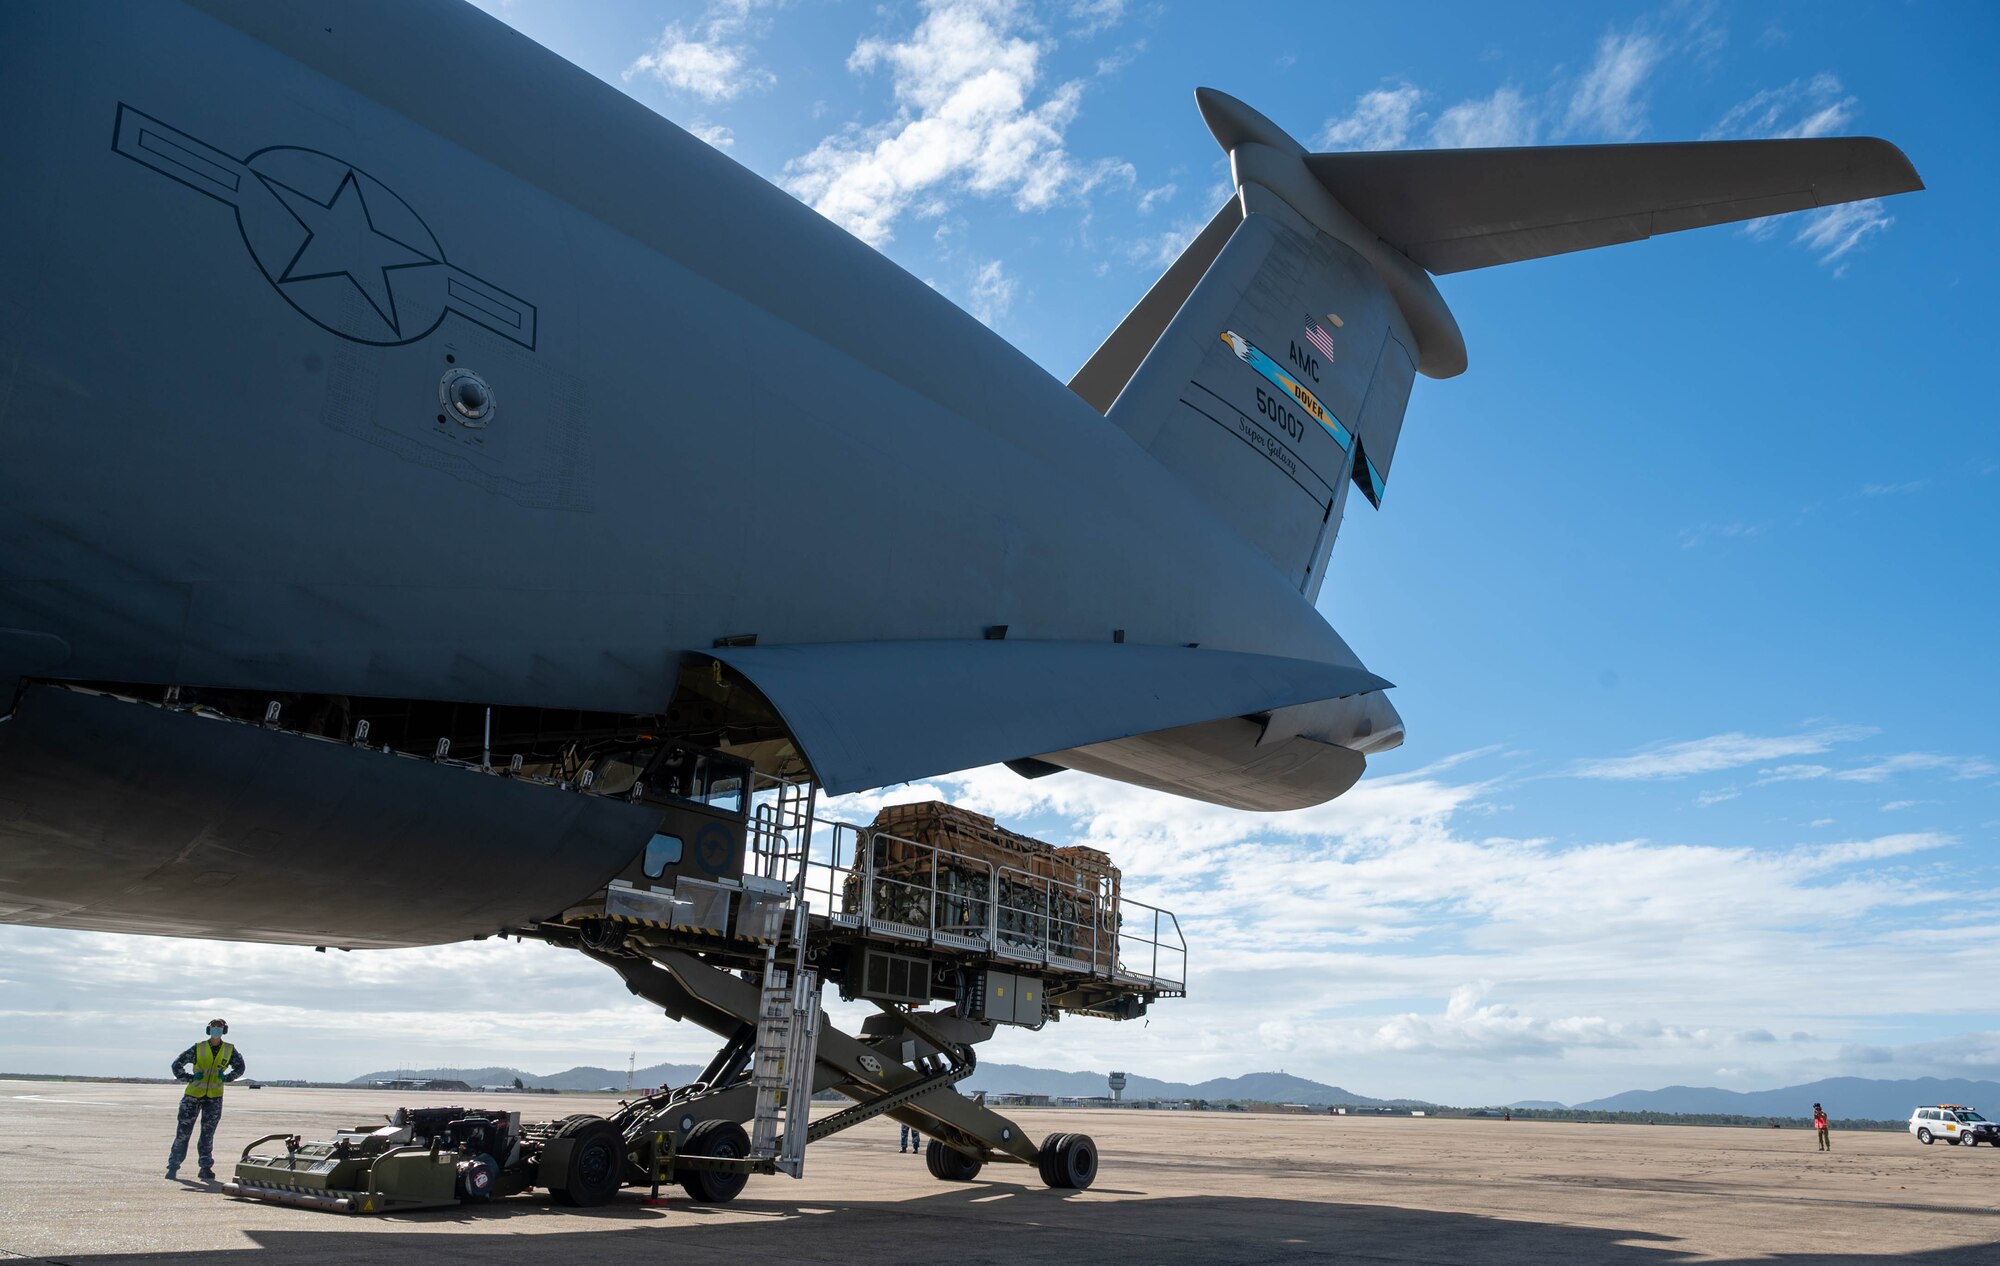 Cargo is unloaded from a Dover Air Force Base C-5M Super Galaxy at Royal Australian Air Force Base Townsville, Australia, July 7, 2021. The C-5 transported two CH-47F Chinook helicopters to RAAF Base Townsville as a part of the Department of Defense’s Foreign Military Sales program. The U.S. and Australia maintain a robust relationship underpinned by shared democratic values, common interests and cultural bonds. The strong alliance is an anchor for peace and stability in the Indo-Pacific region and around the world. (U.S. Air Force photo by Senior Airman Faith Schaefer)